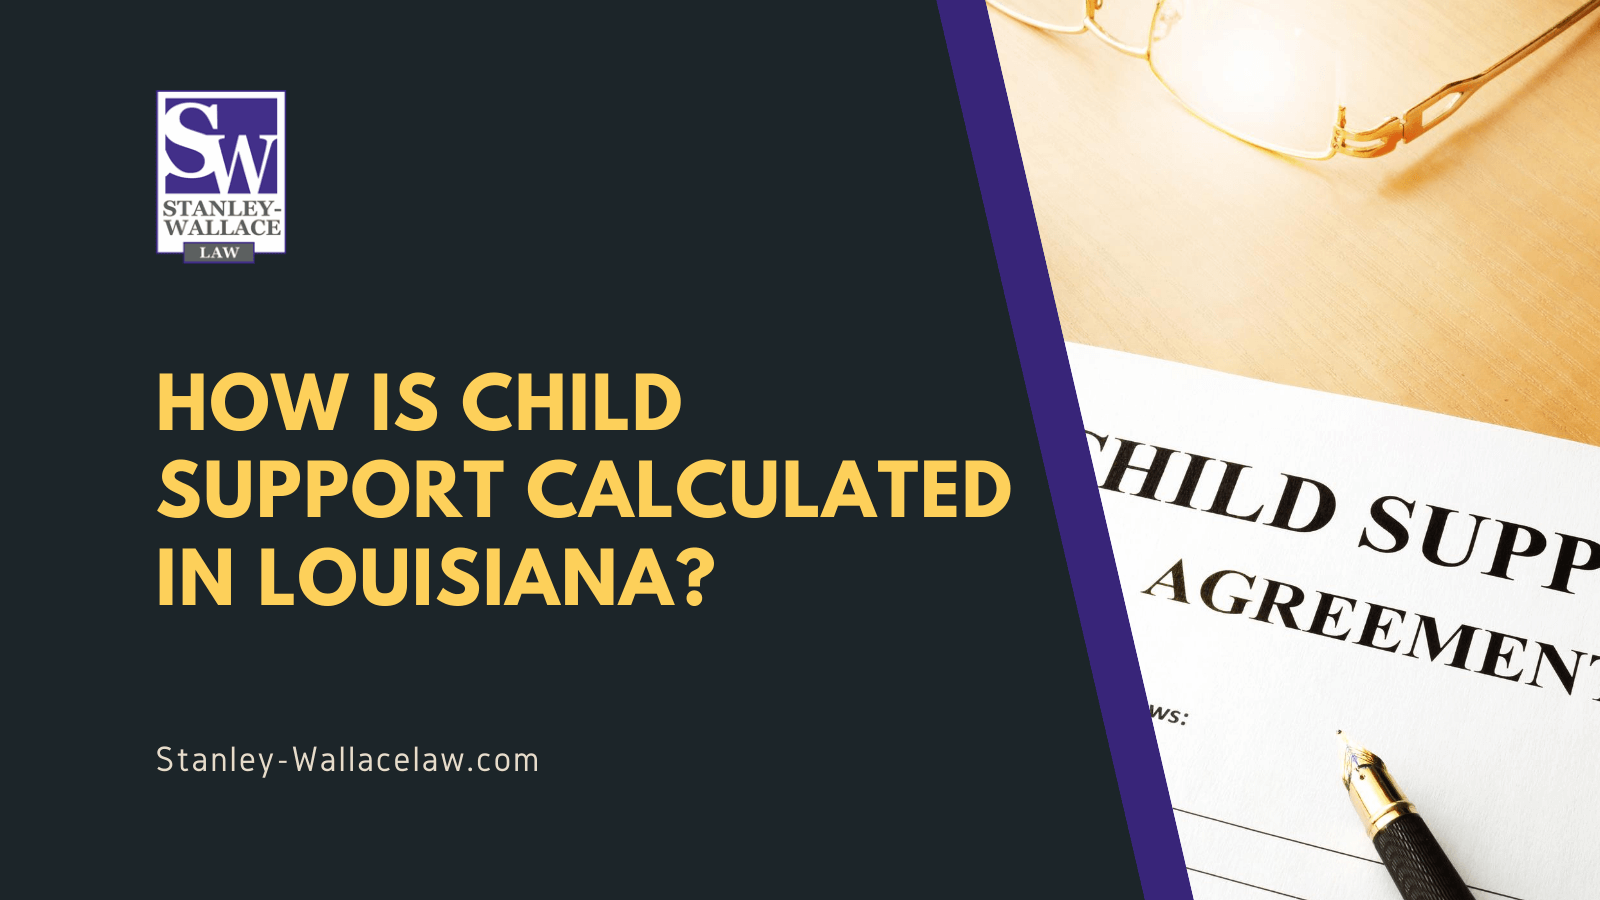 How is Child Support Calculated in Louisiana - Stanley-Wallace Law - slidell louisiana